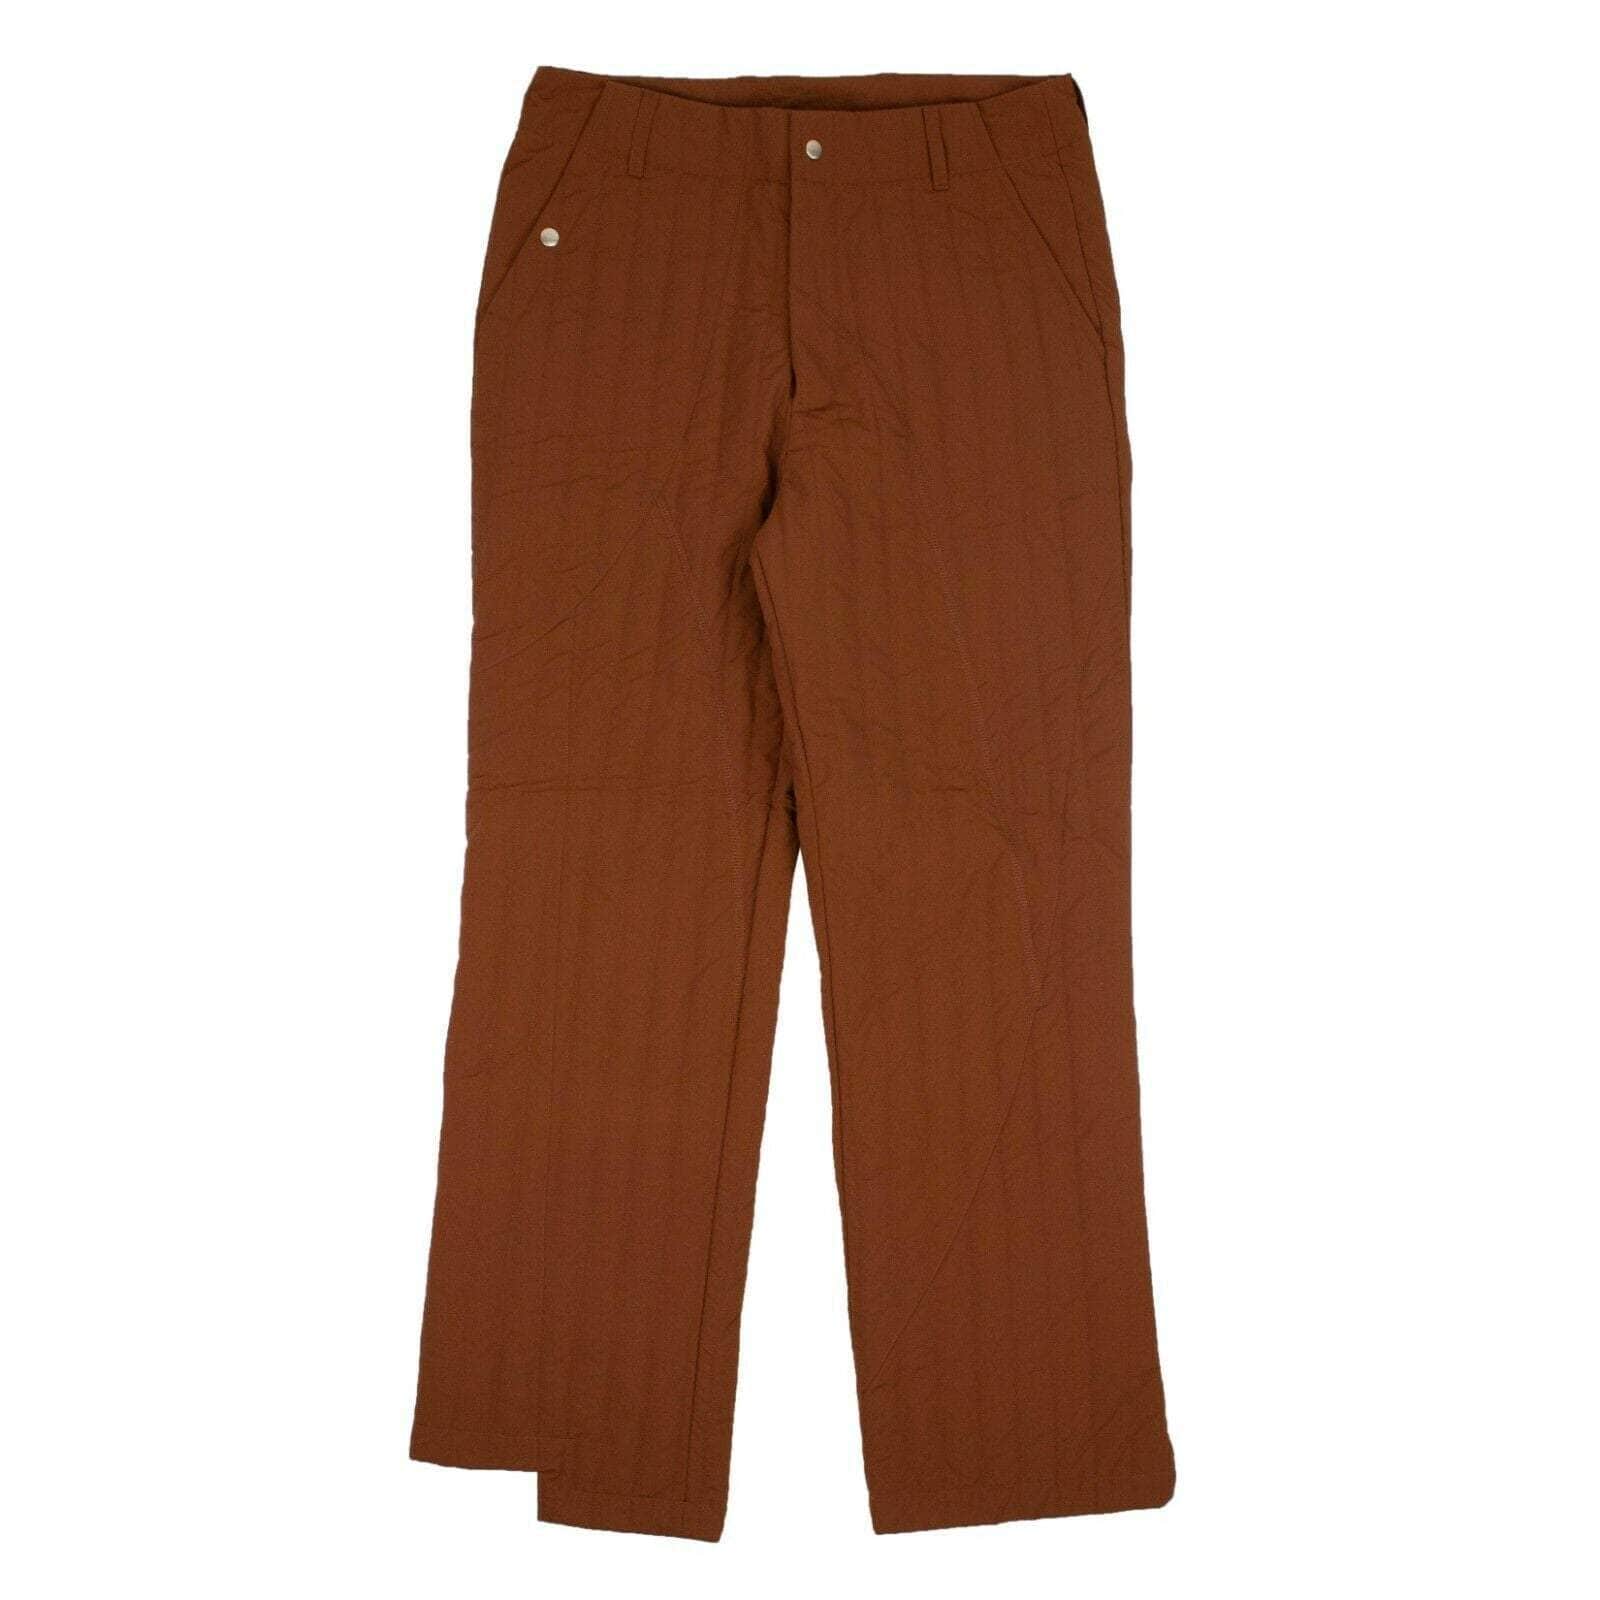 A-COLD-WALL* 250-500, a-cold-wall, channelenable-all, chicmi, couponcollection, gender-mens, main-clothing, mens-casual-pants, size-m, size-s M A-COLD-WALL* Rust Nylon Casual Pants 87AB-ACW-1082/NE 87AB-ACW-1082/NE